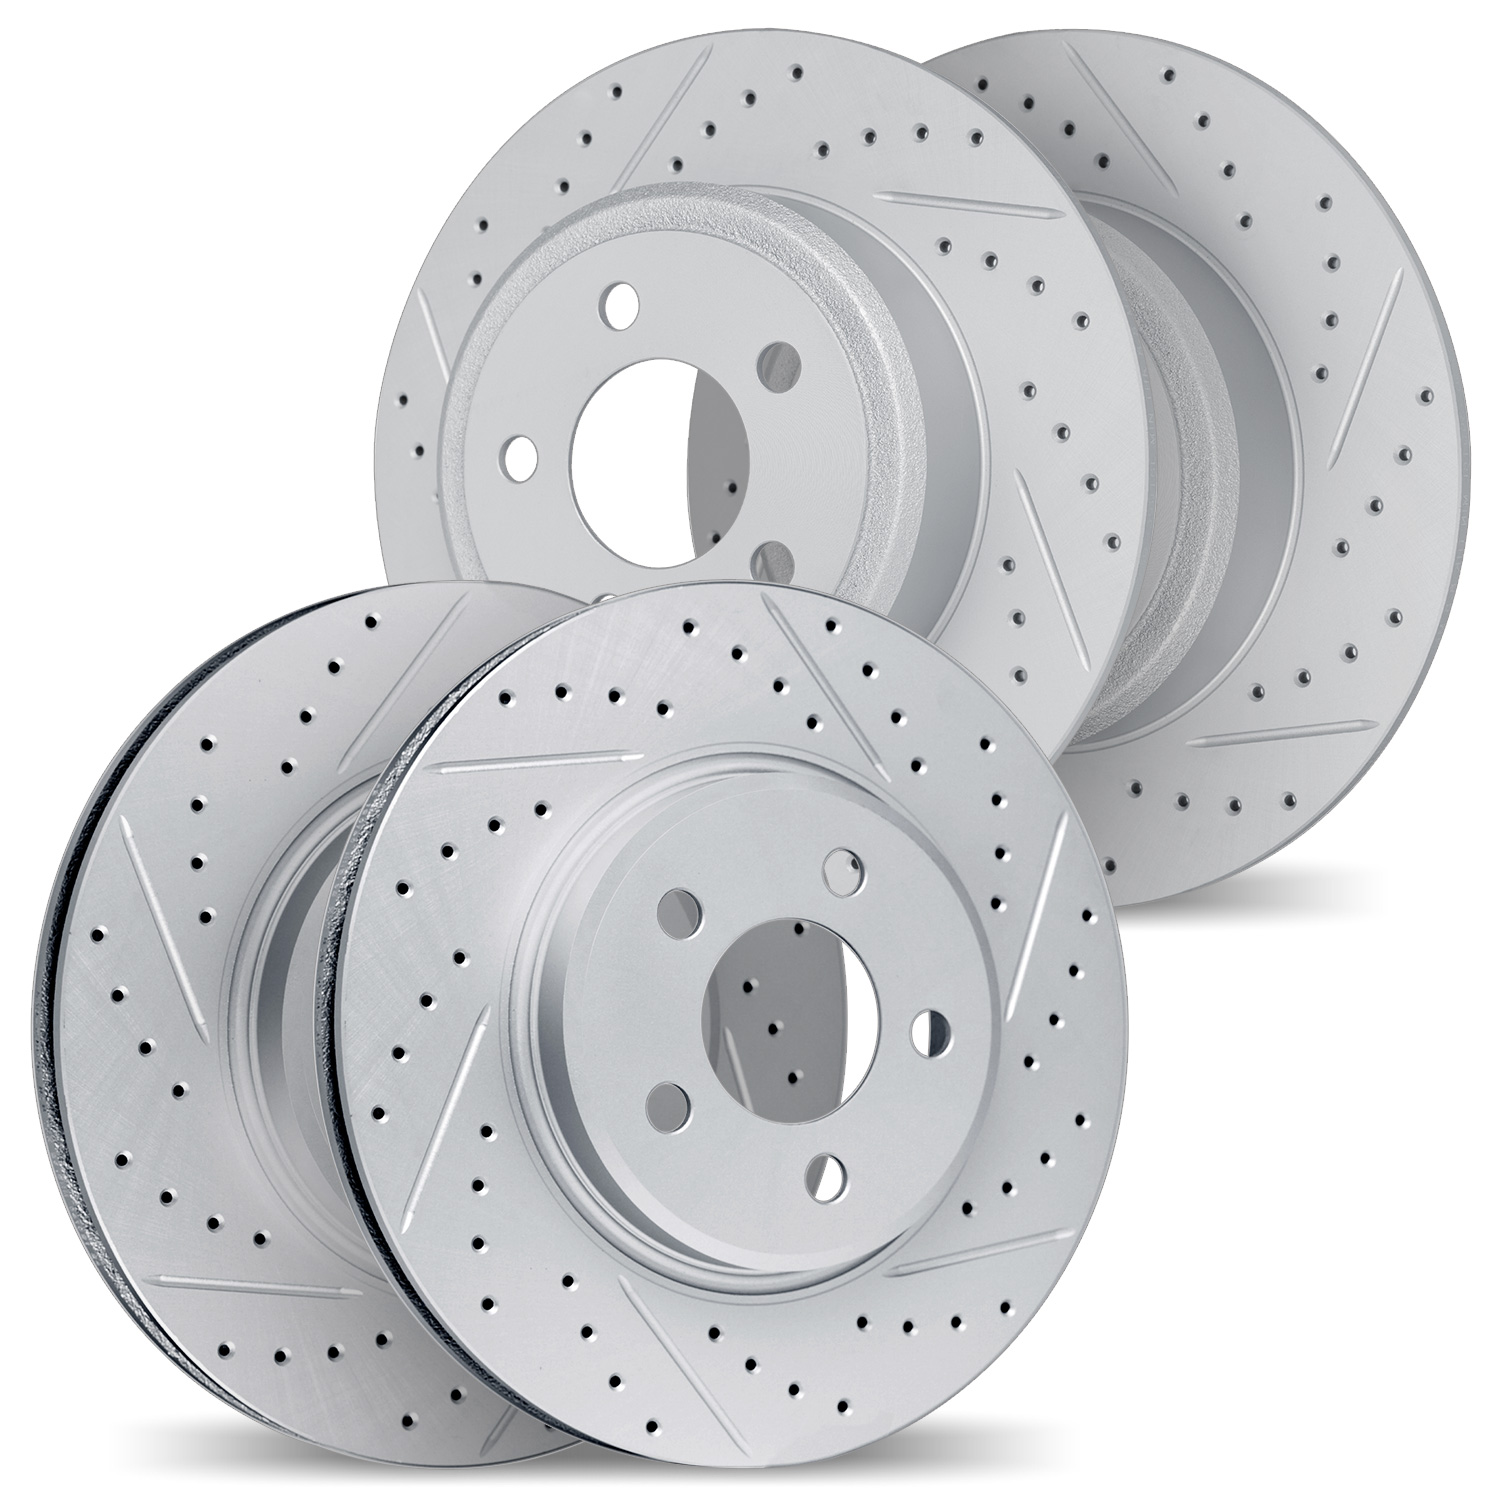 2004-03060 Geoperformance Drilled/Slotted Brake Rotors, 2004-2006 Kia/Hyundai/Genesis, Position: Front and Rear